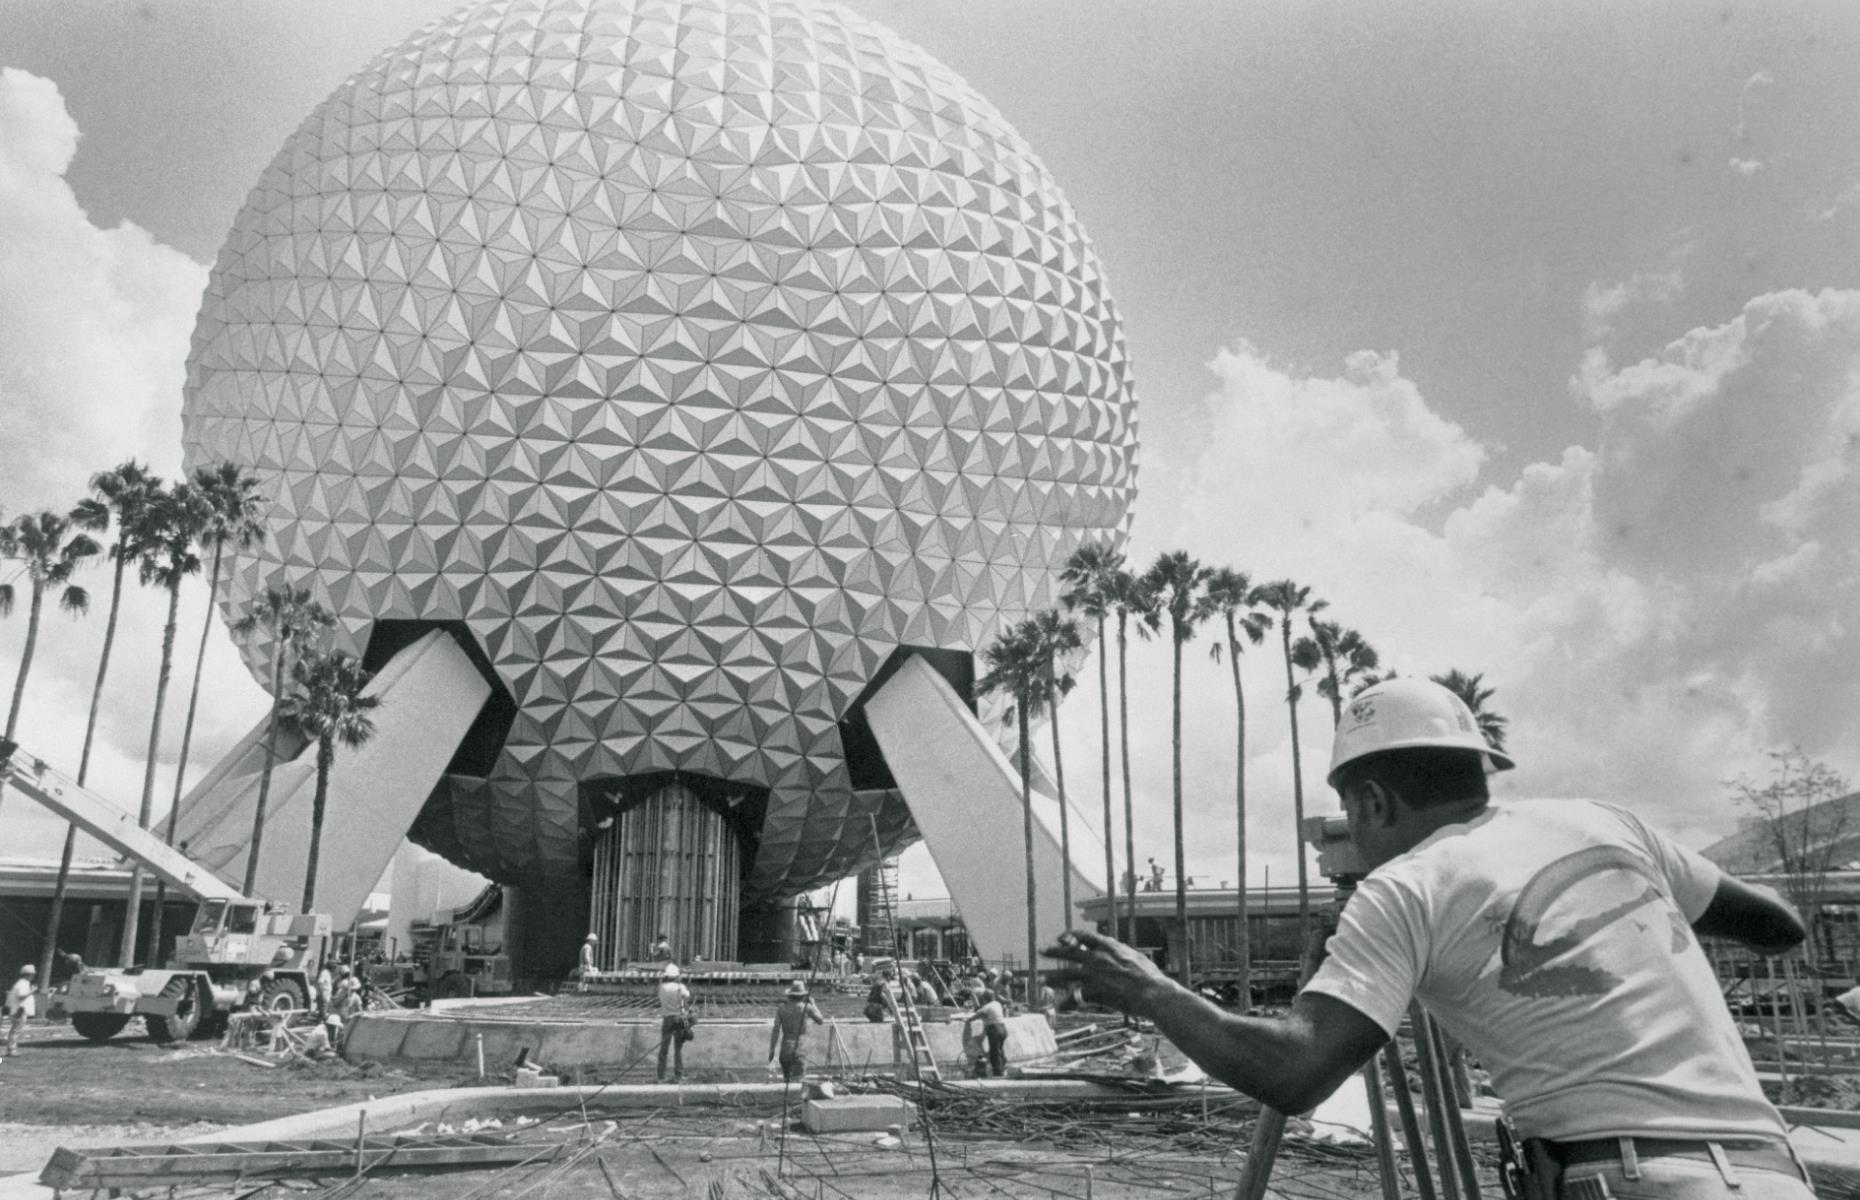 <p>Walt Disney World in Florida opened on 1 October 1971 and greeted 10,000 eager fans on its first day. Initially, the resort was made up of six individually themed lands: Main Street USA, Adventureland, Fantasyland, Frontierland, Liberty Square and Tomorrowland. In 1982, Epcot (pictured here under construction) opened, and its name initially stood for “Experimental Prototype Community of Tomorrow”. Walt Disney World usually attracts more than 52 million people a year, making it the most visited holiday resort in the world.</p>